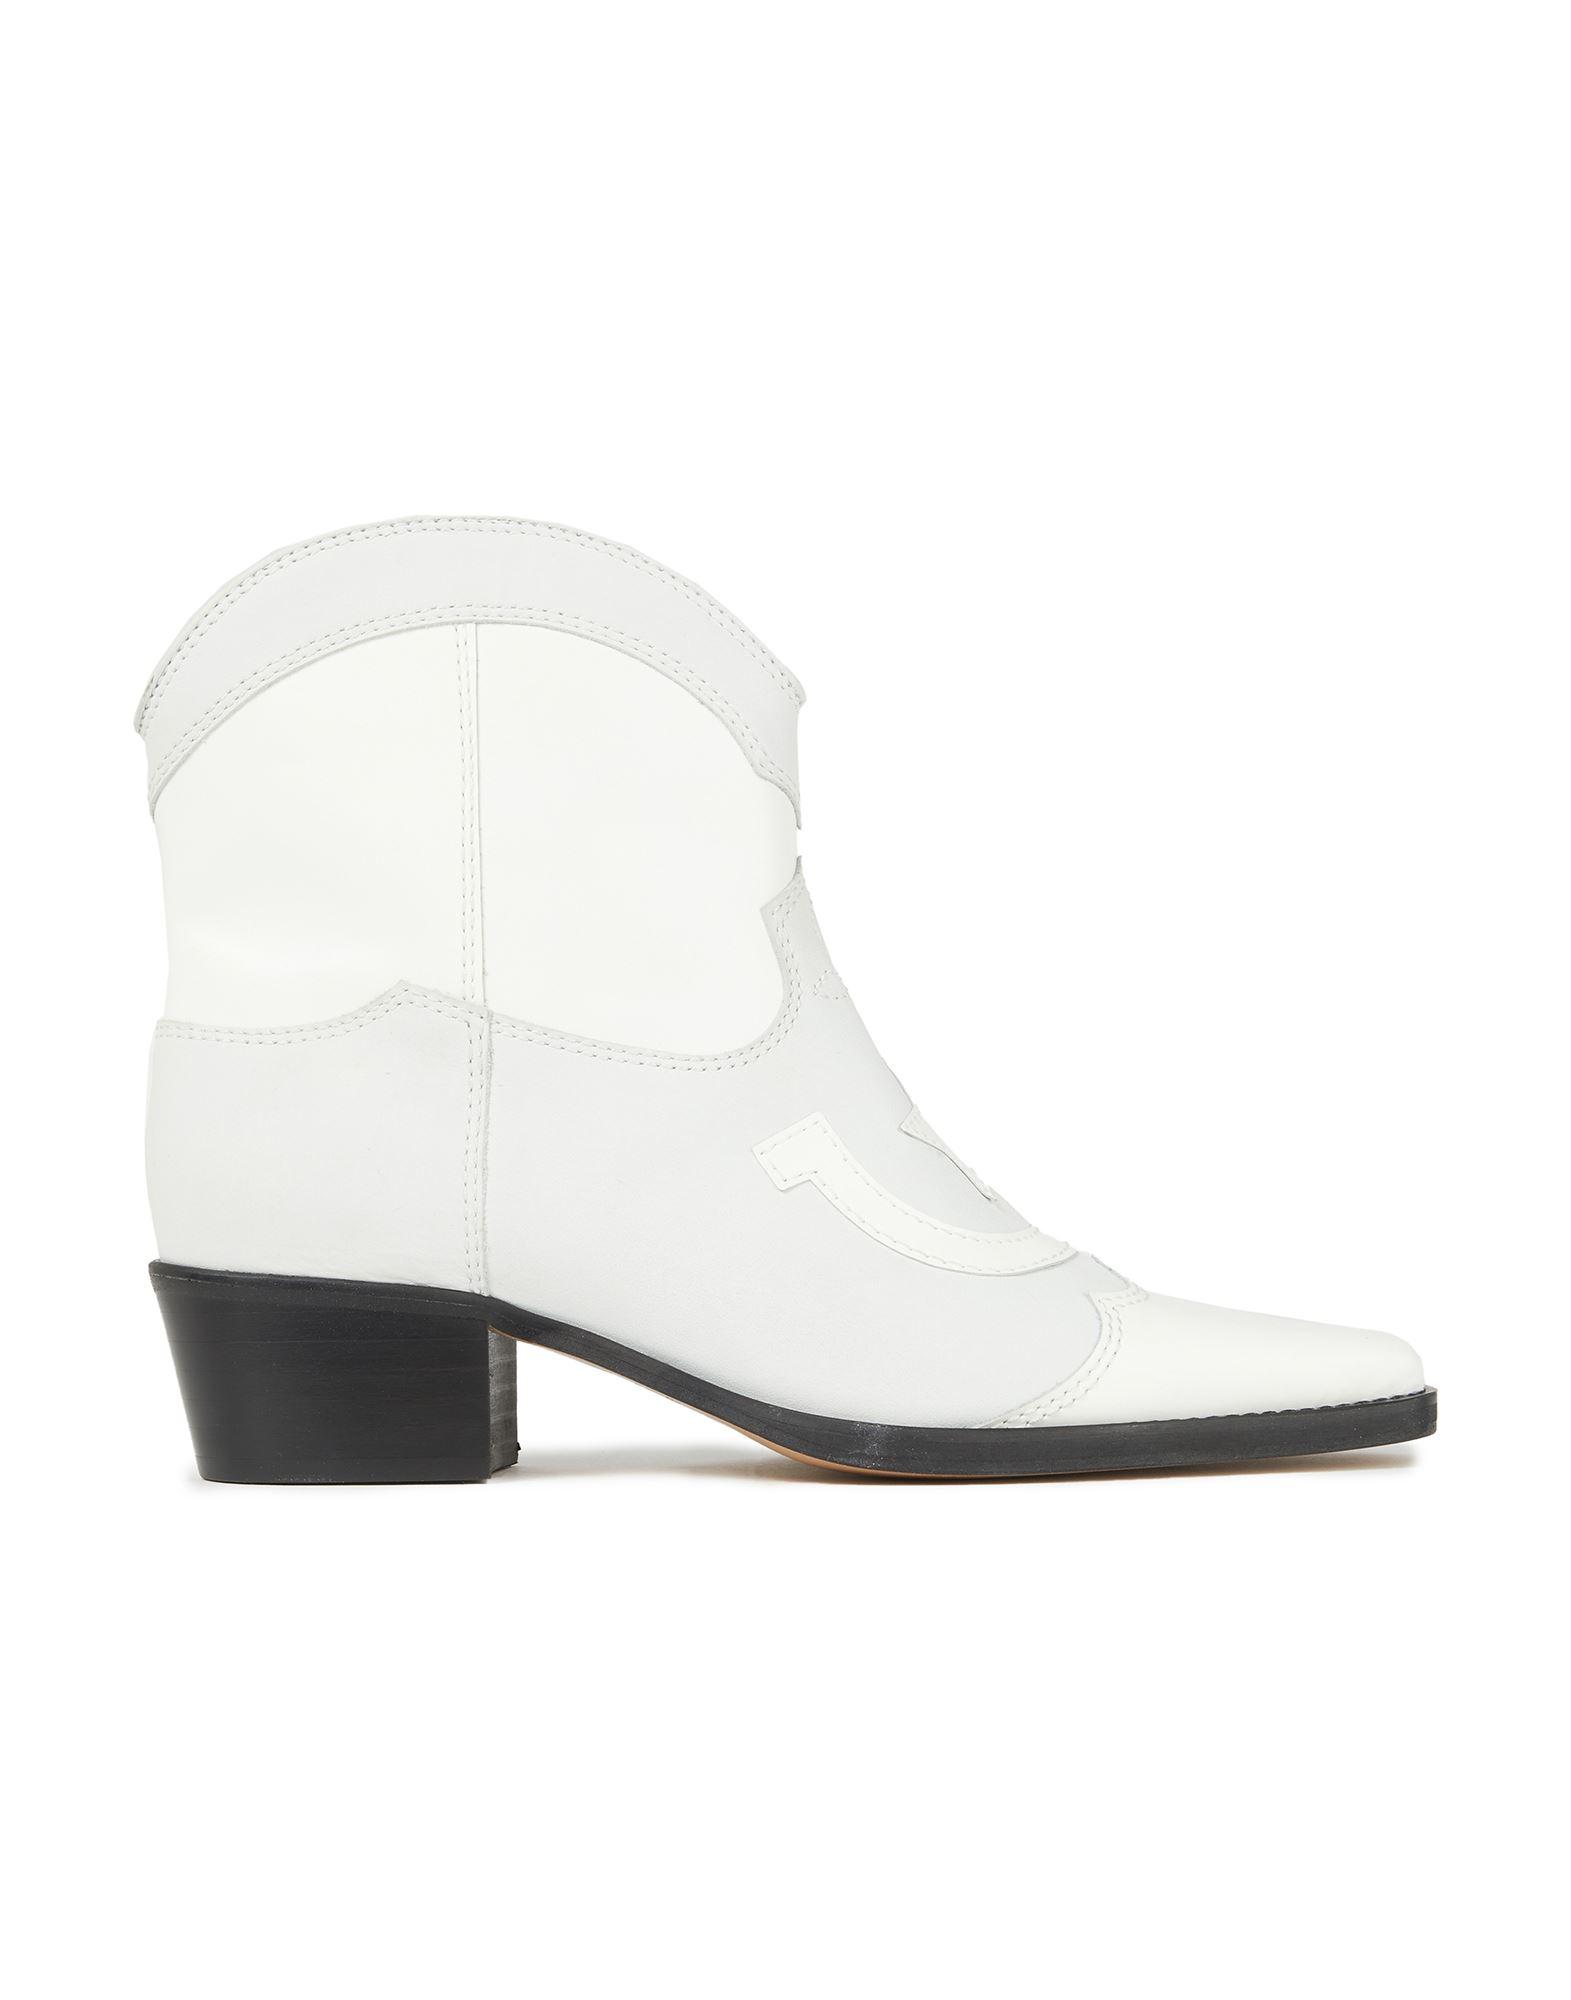 Ganni Leather Ankle Boots in White | Lyst